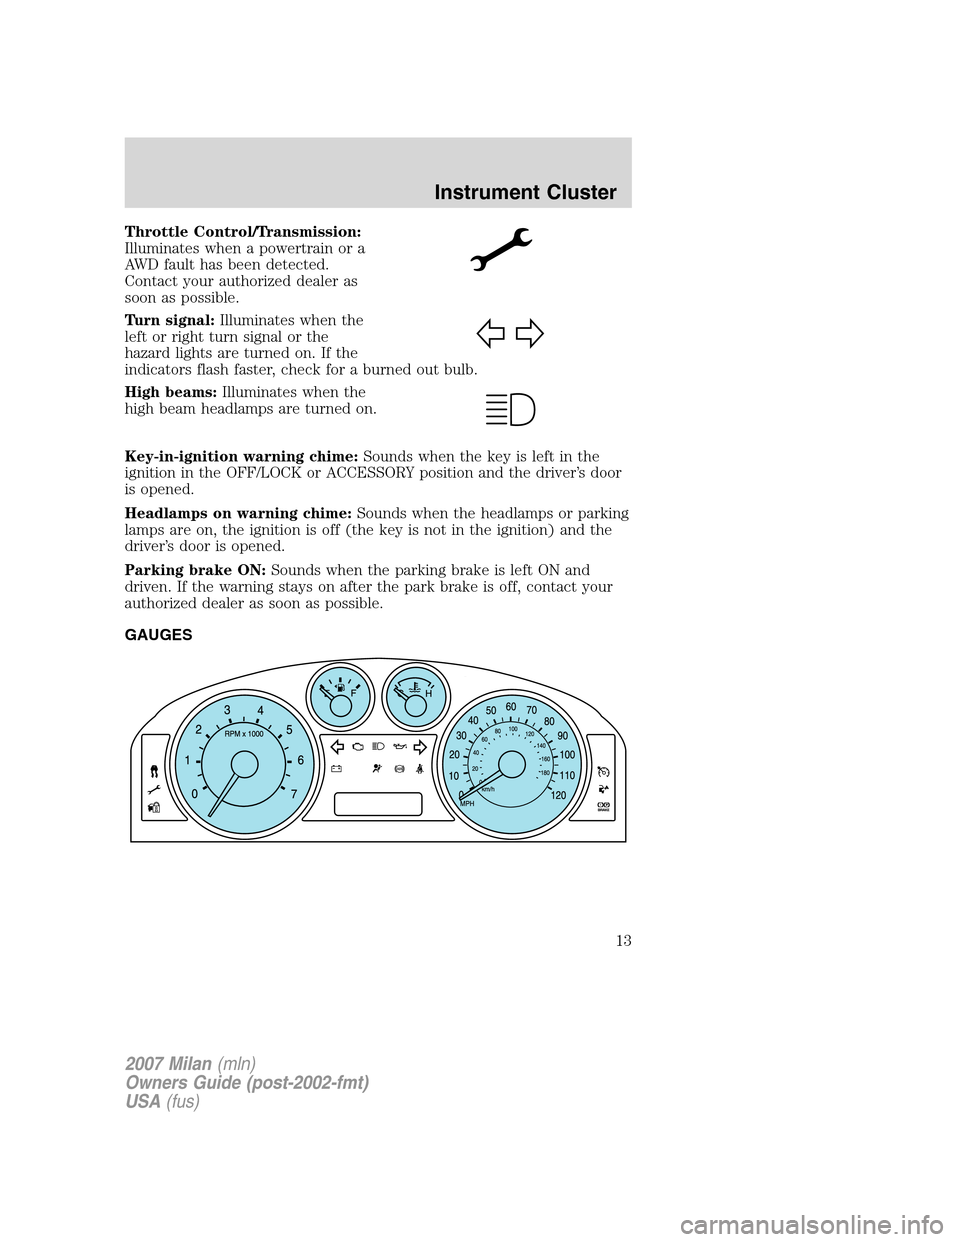 Mercury Milan 2007  s User Guide Throttle Control/Transmission:
Illuminates when a powertrain or a
AWD fault has been detected.
Contact your authorized dealer as
soon as possible.
Turn signal:Illuminates when the
left or right turn s